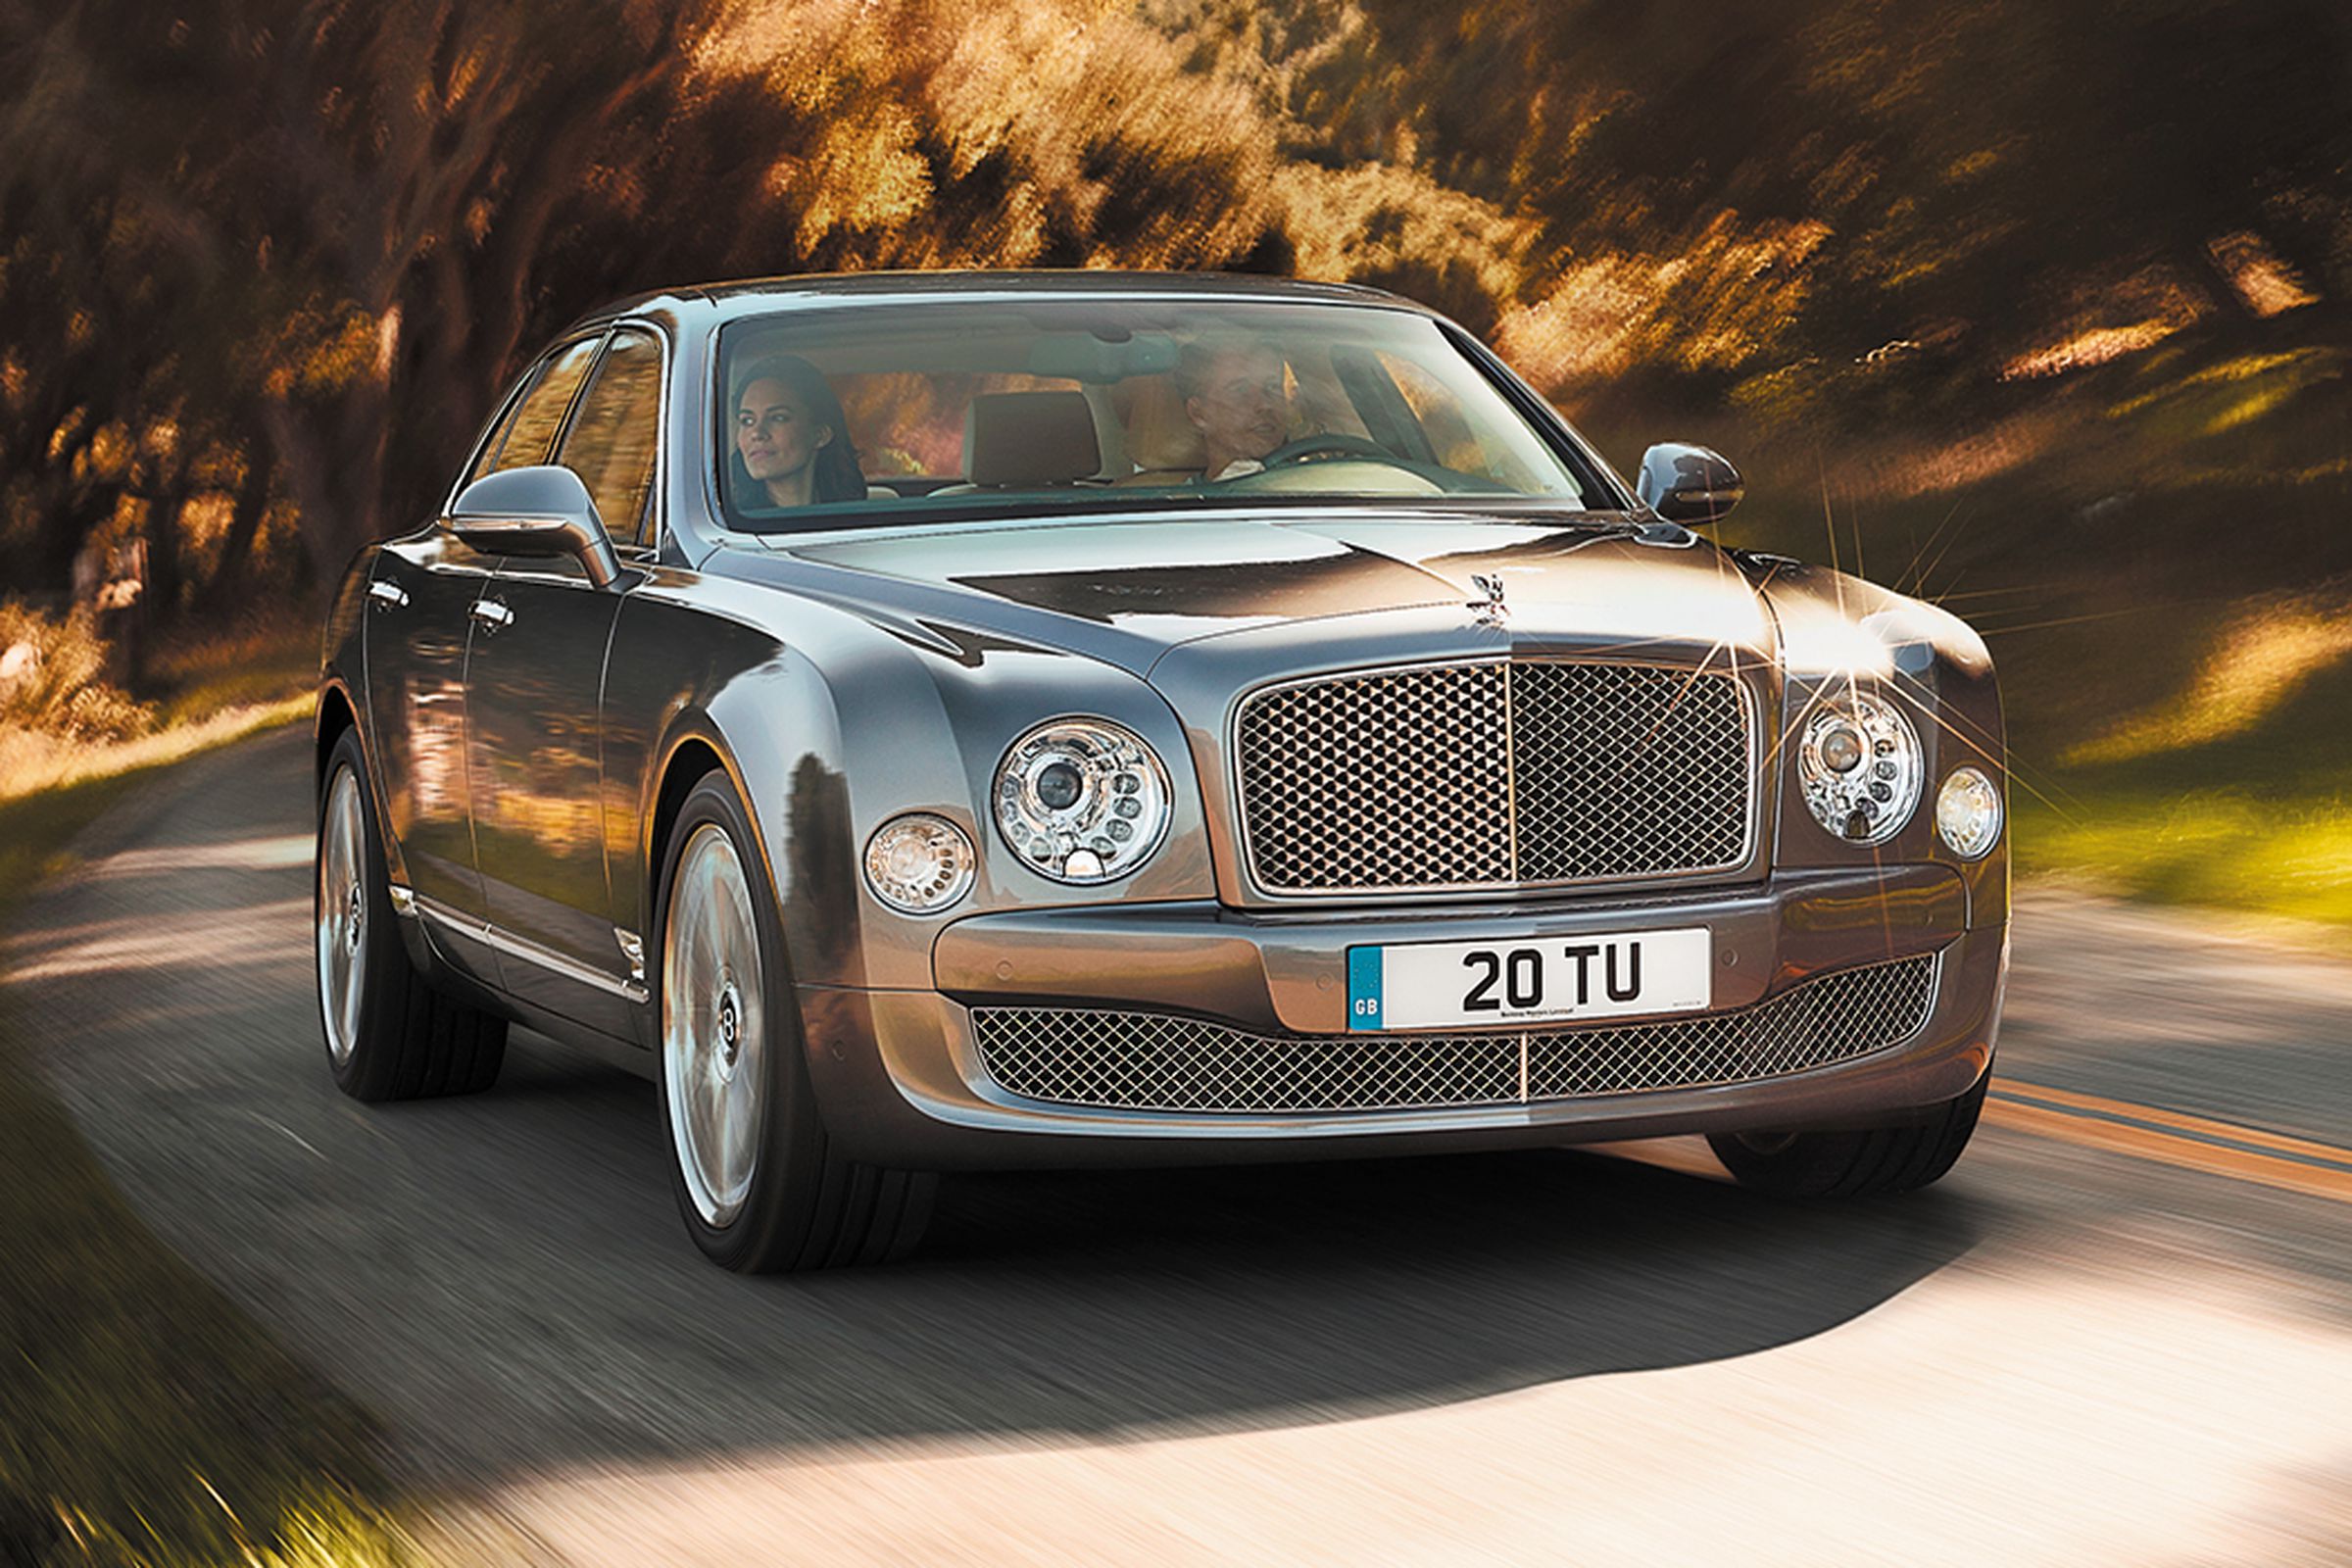 The Bentley Mulsanne, a car Jony Ive actually likes (and owns).